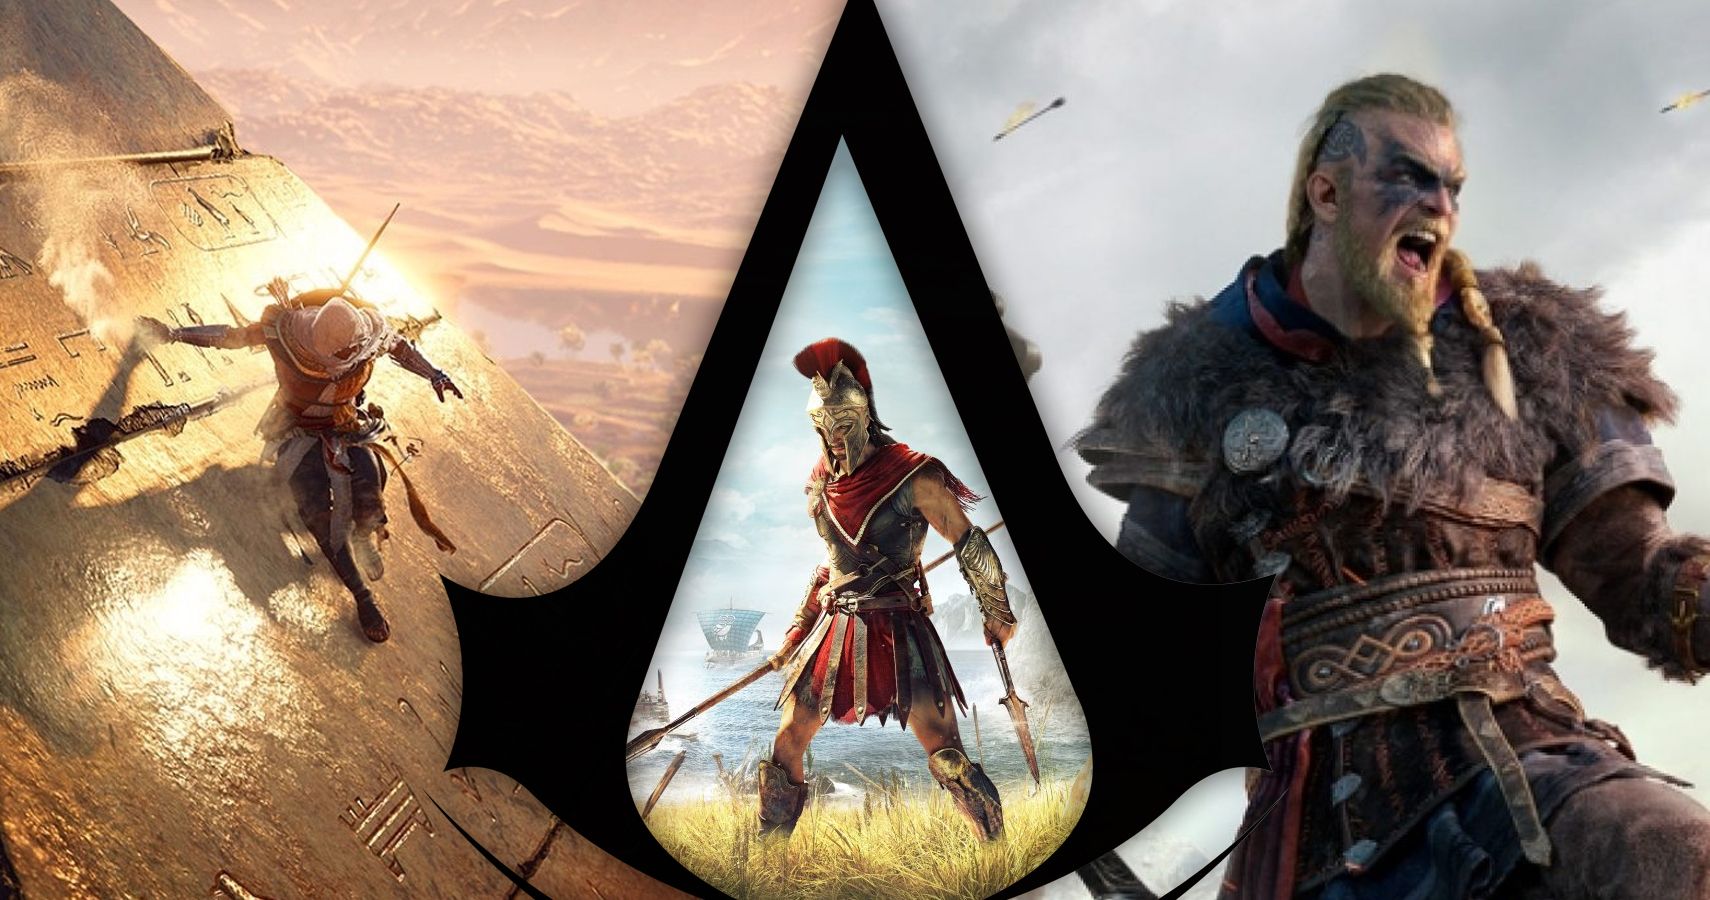 Play Assassin's Creed Origins, Assassin's Creed Odyssey, and Assassin's  Creed Valhalla For $1 With Ubisoft+